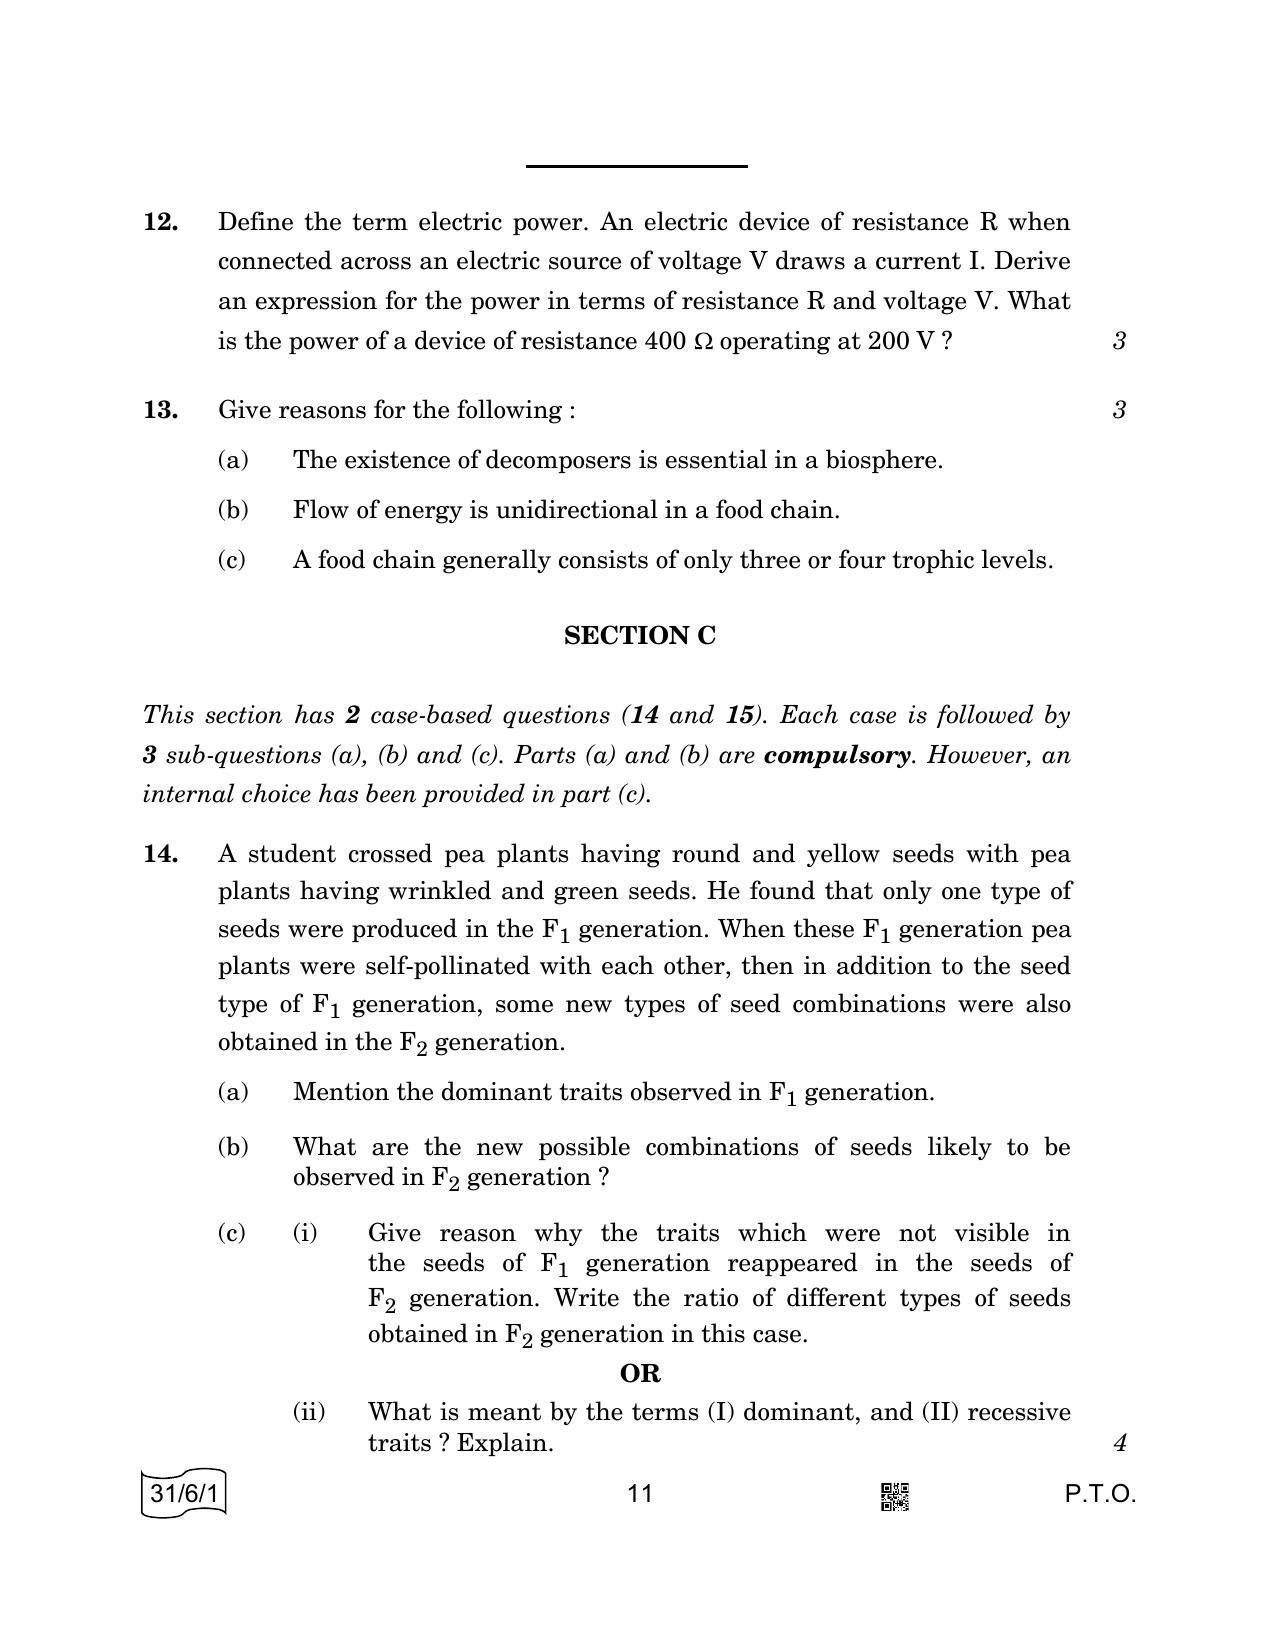 CBSE Class 10 31-6-1 SCIENCE 2022 Compartment Question Paper - Page 11